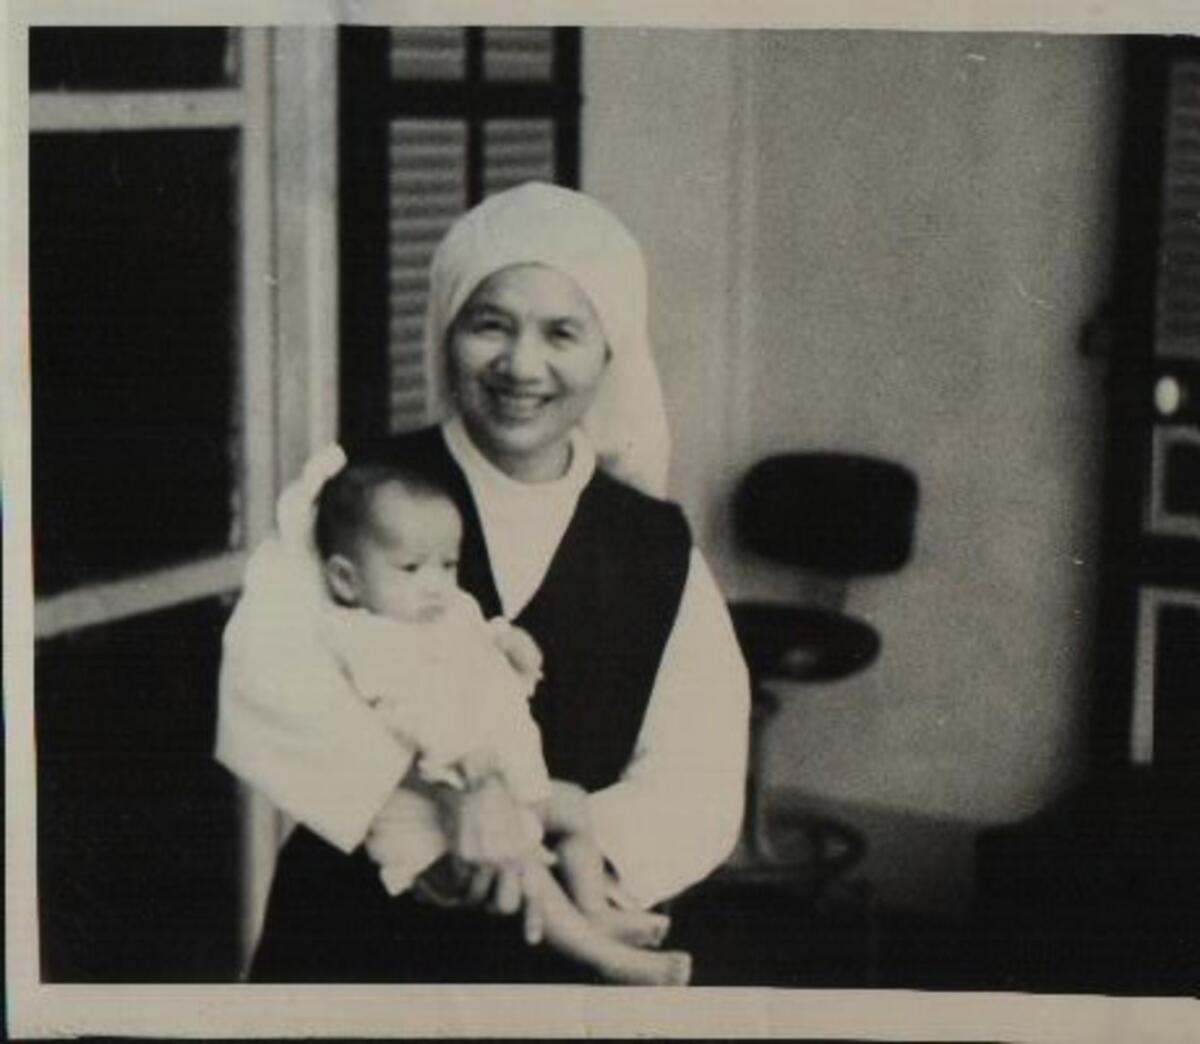 Sister Angela Nguyen holds the baby. It was at Nguyen's urging that led Bao Tran to name the girl.